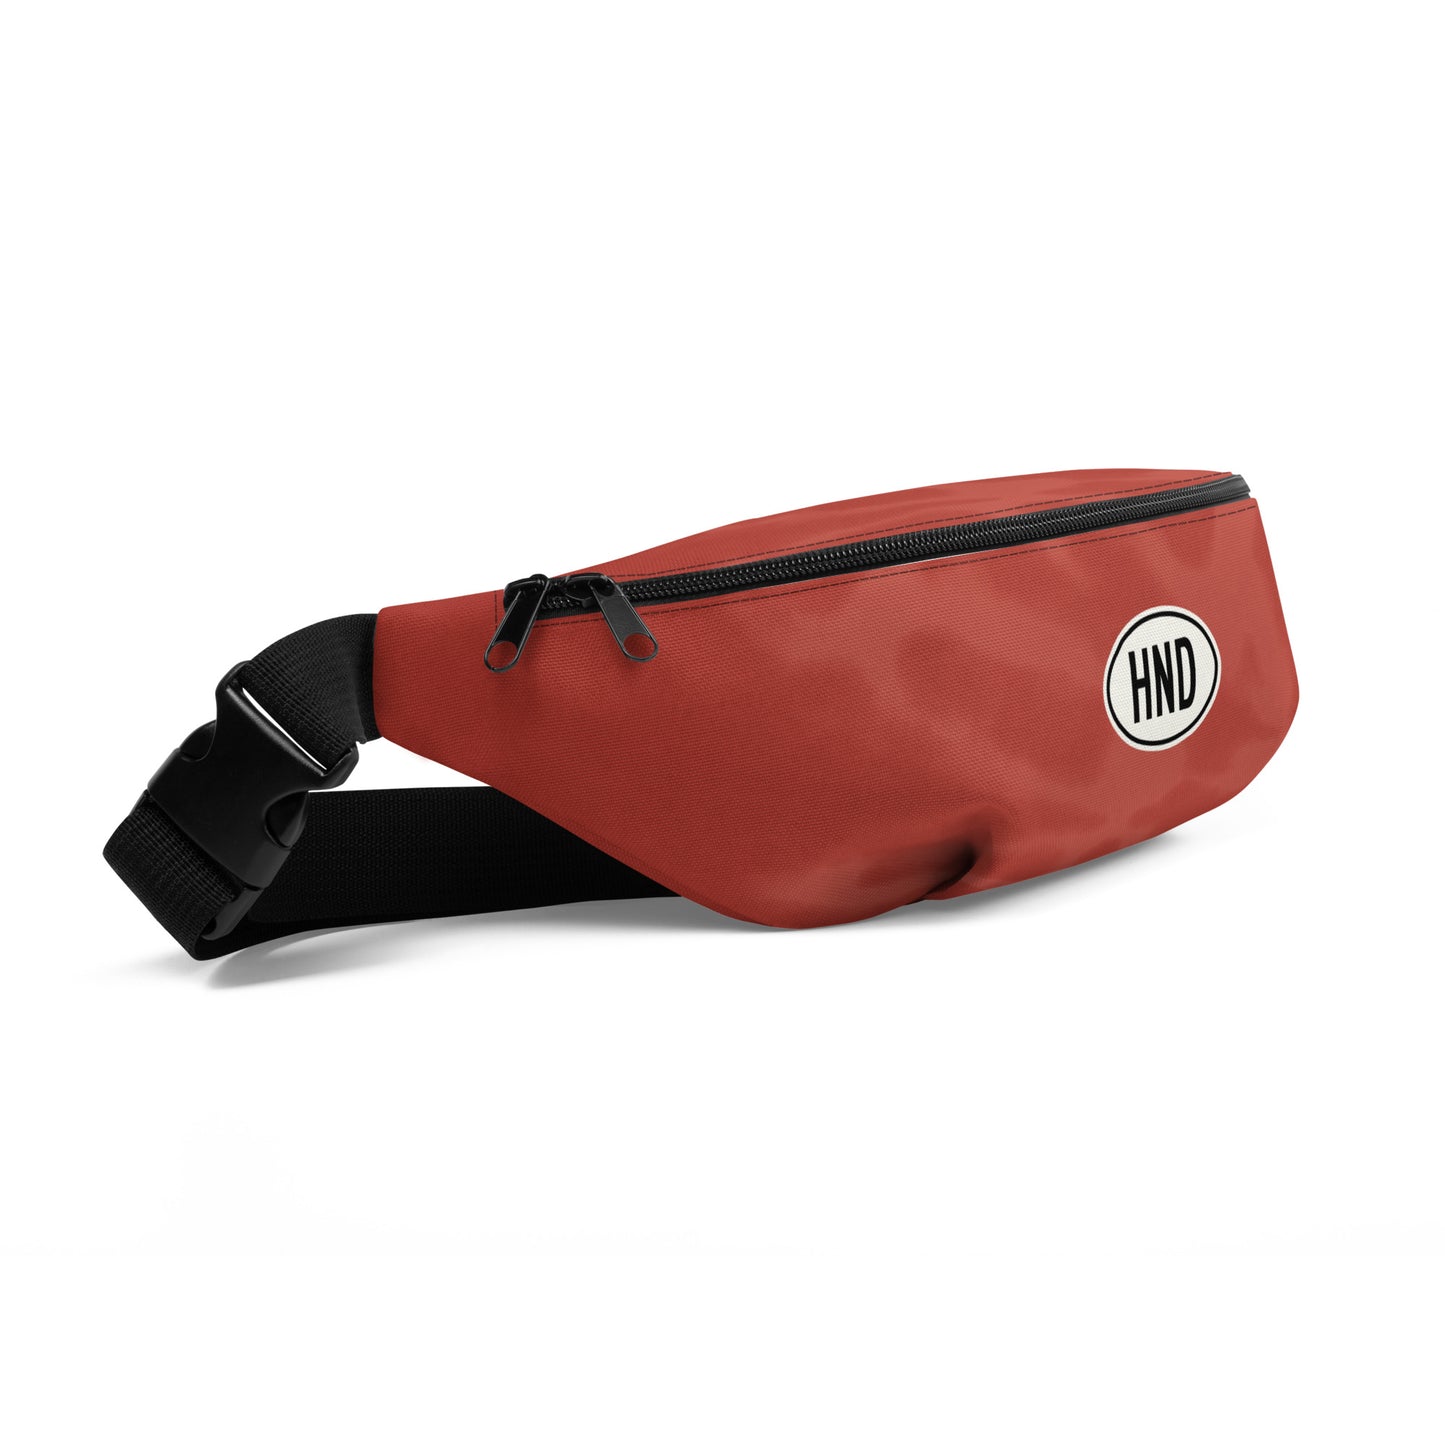 Travel Gift Fanny Pack - Red Tie-Dye • HND Tokyo • YHM Designs - Image 07